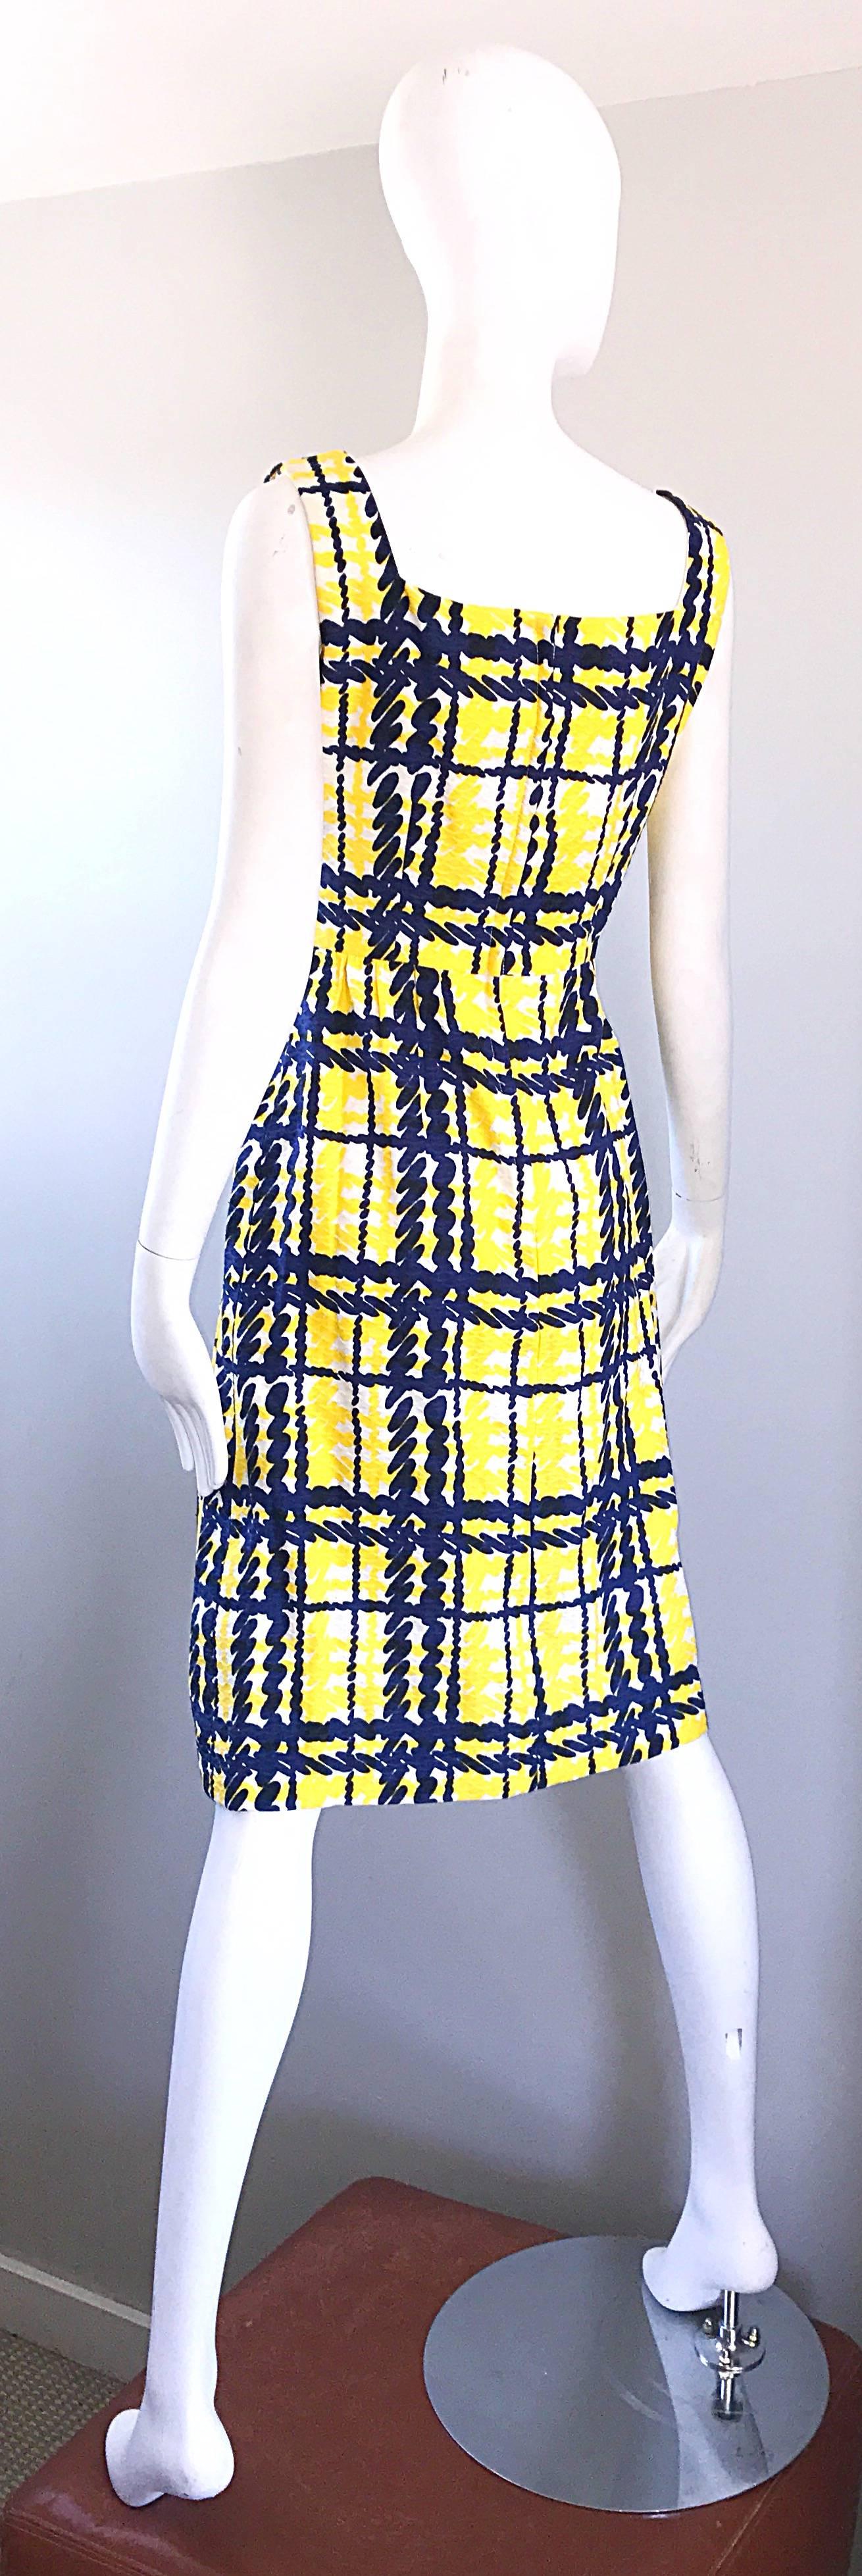 Alan Phillips Navy Blue Yellow and White Plaid Cotton A Line Dress, 1960s  2